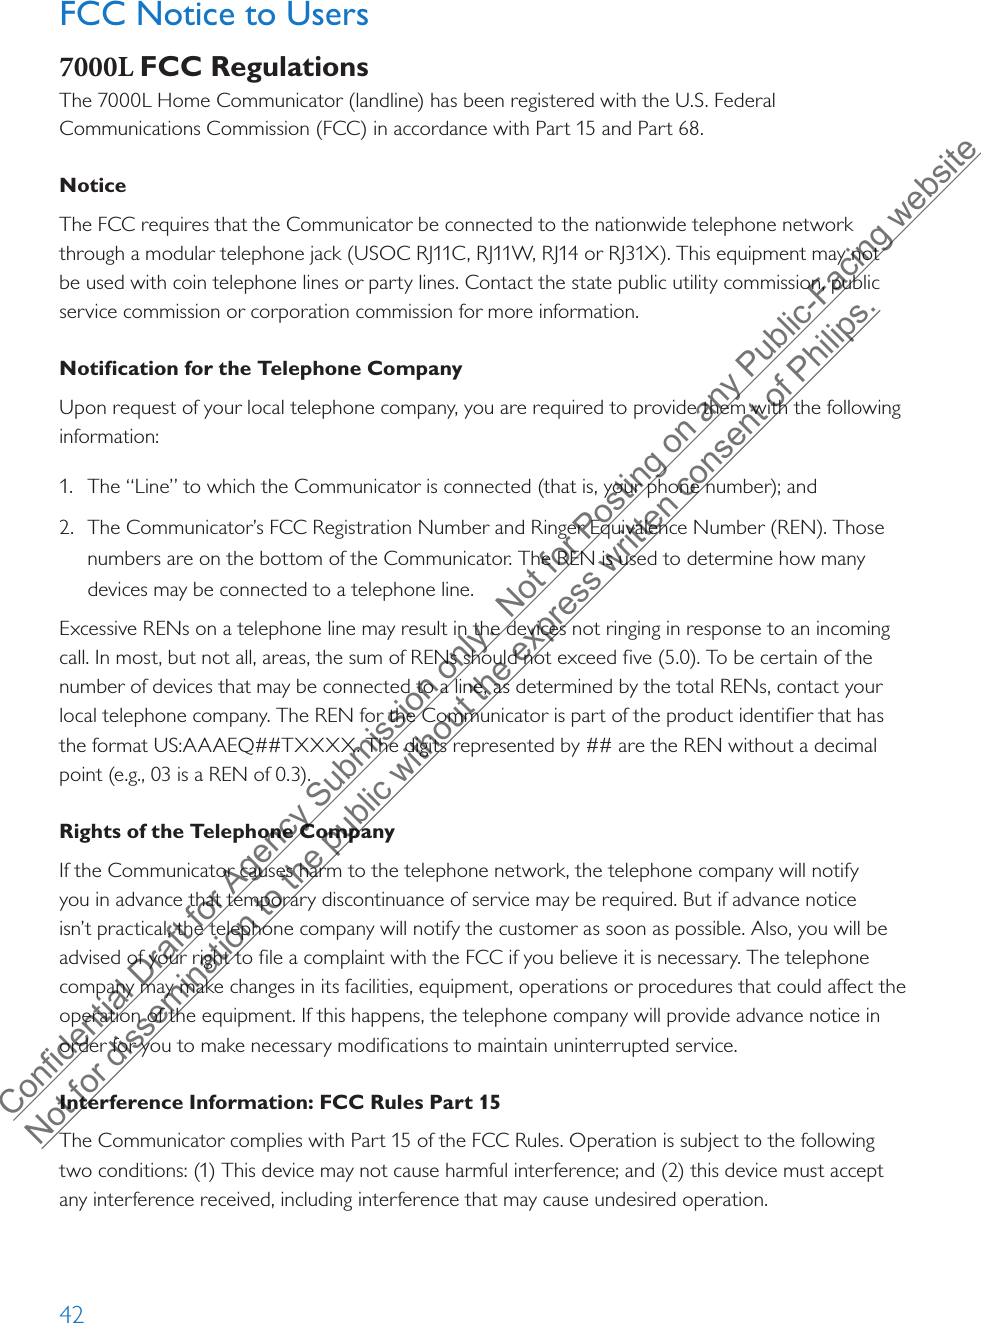 42FCC Notice to Users7000L FCC RegulationsThe 7000L Home Communicator (landline) has been registered with the U.S. Federal Communications Commission (FCC) in accordance with Part 15 and Part 68.Notice The FCC requires that the Communicator be connected to the nationwide telephone network through a modular telephone jack (USOC RJ11C, RJ11W, RJ14 or RJ31X). This equipment may not be used with coin telephone lines or party lines. Contact the state public utility commission, public service commission or corporation commission for more information.Notification for the Telephone CompanyUpon request of your local telephone company, you are required to provide them with the following information:1. The “Line” to which the Communicator is connected (that is, your phone number); and2. The Communicator’s FCC Registration Number and Ringer Equivalence Number (REN). Thosenumbers are on the bottom of the Communicator. The REN is used to determine how manydevices may be connected to a telephone line.Excessive RENs on a telephone line may result in the devices not ringing in response to an incoming call. In most, but not all, areas, the sum of RENs should not exceed five (5.0). To be certain of the number of devices that may be connected to a line, as determined by the total RENs, contact your local telephone company. The REN for the Communicator is part of the product identifier that has the format US:AAAEQ##TXXXX. The digits represented by ## are the REN without a decimal point (e.g., 03 is a REN of 0.3).Rights of the Telephone CompanyIf the Communicator causes harm to the telephone network, the telephone company will notify you in advance that temporary discontinuance of service may be required. But if advance notice isn’t practical, the telephone company will notify the customer as soon as possible. Also, you will be advised of your right to file a complaint with the FCC if you believe it is necessary. The telephone company may make changes in its facilities, equipment, operations or procedures that could affect the operation of the equipment. If this happens, the telephone company will provide advance notice in order for you to make necessary modifications to maintain uninterrupted service.Interference Information: FCC Rules Part 15The Communicator complies with Part 15 of the FCC Rules. Operation is subject to the following two conditions: (1) This device may not cause harmful interference; and (2) this device must accept any interference received, including interference that may cause undesired operation.Confidential Draft for Agency Submission only.  Not for Posting on any Public-Facing website Not for dissemination to the public without the express written consent of Philips.  